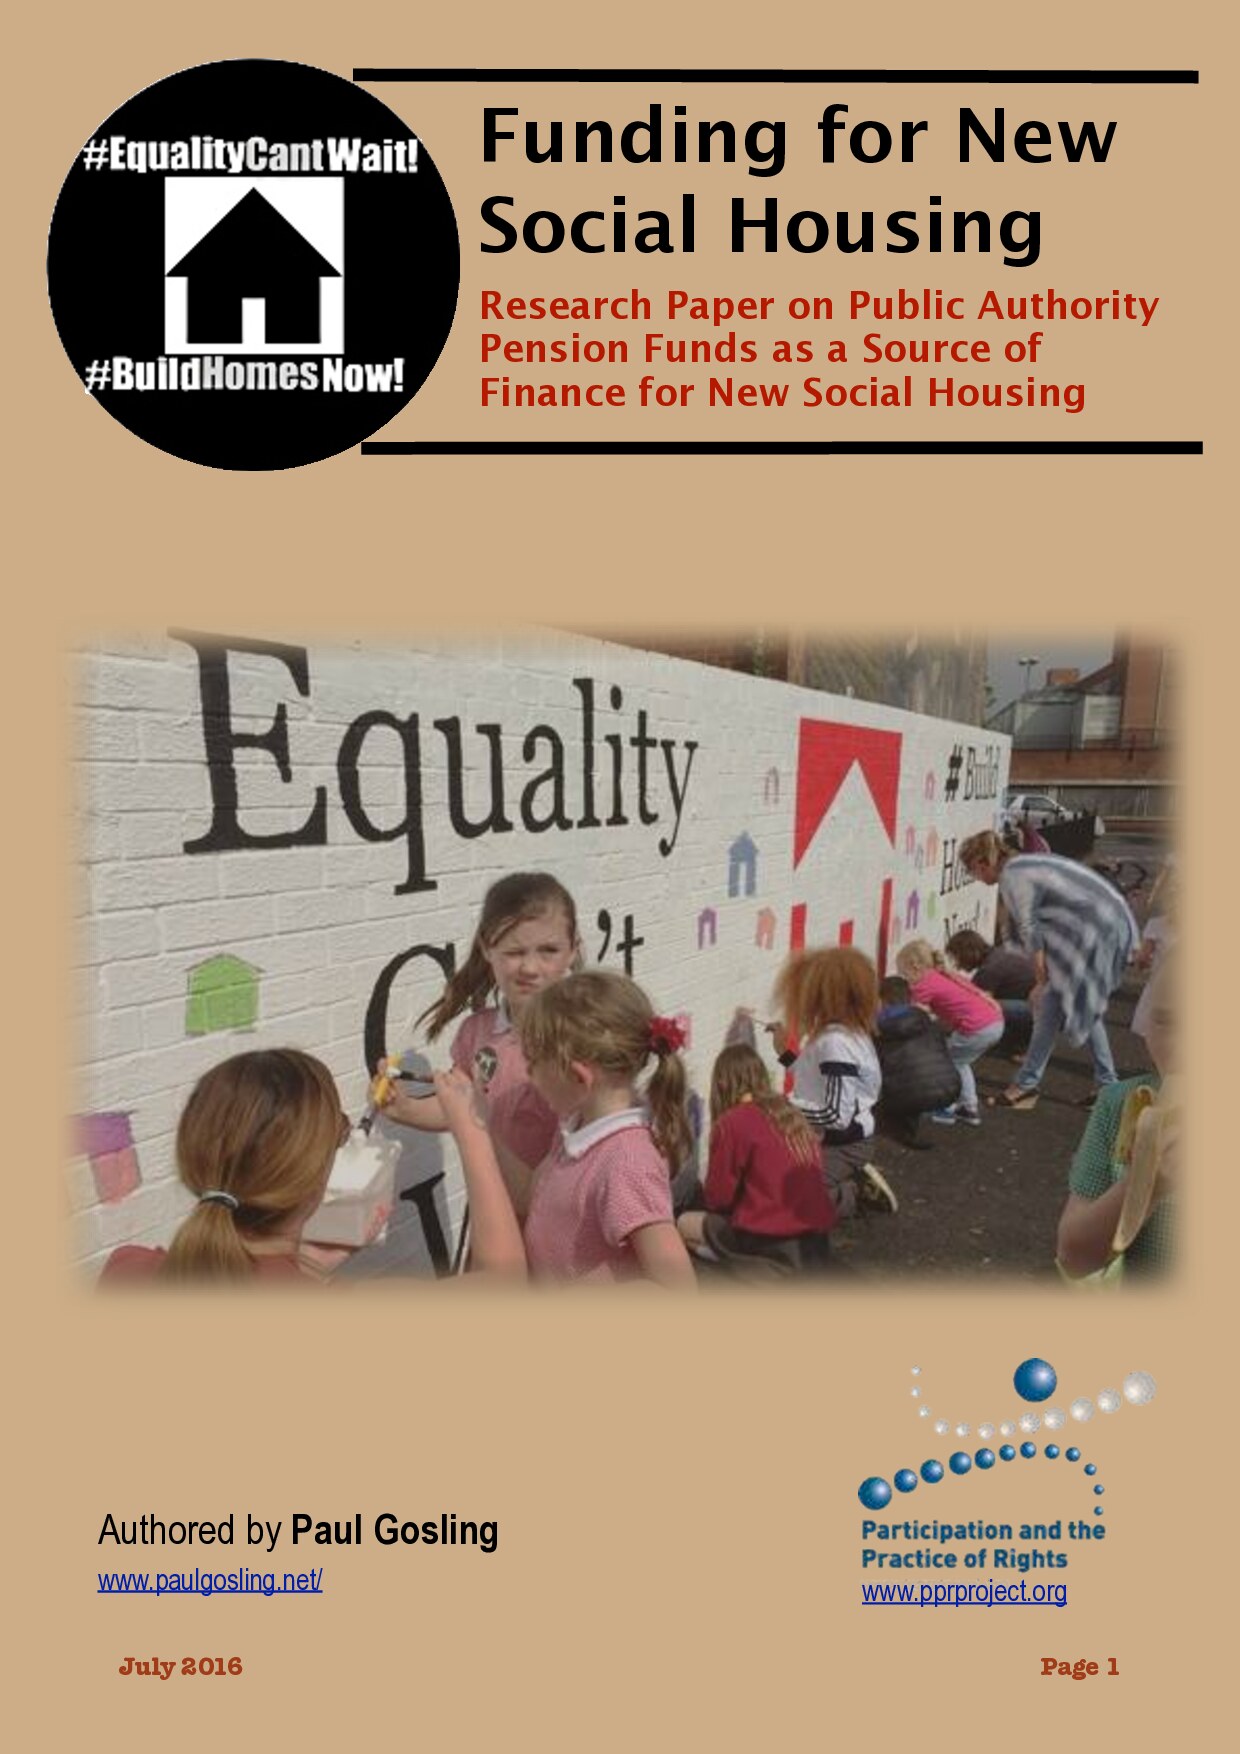 Funding New Social Housing: Research Paper on Public Authority Pension Funds as a Source of Finance